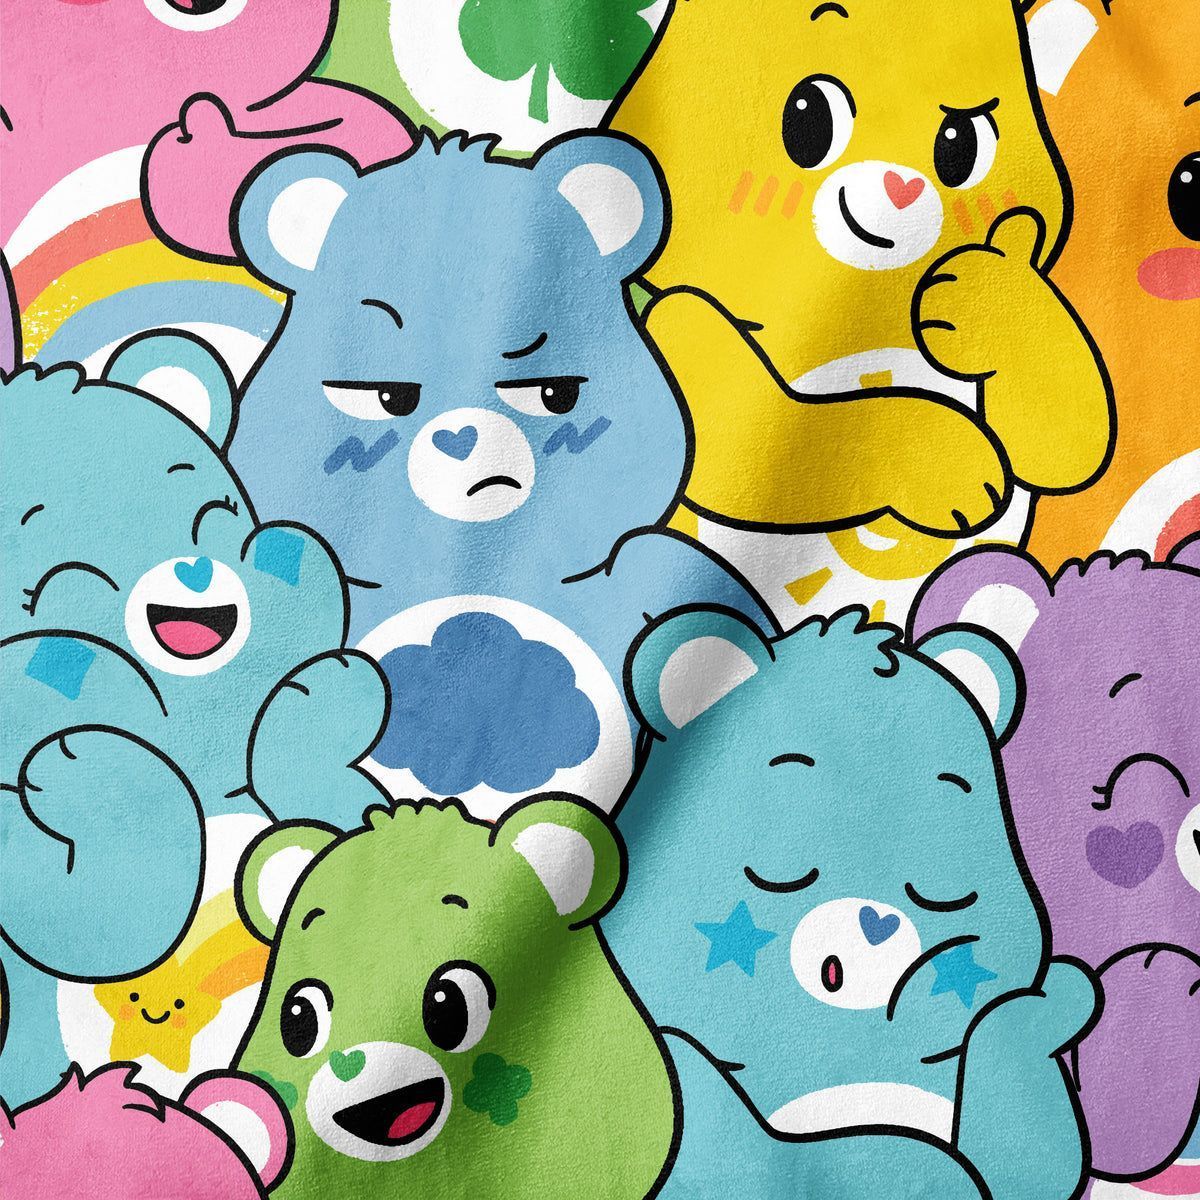 A collage of Care Bears characters in a variety of colors. - Care Bears